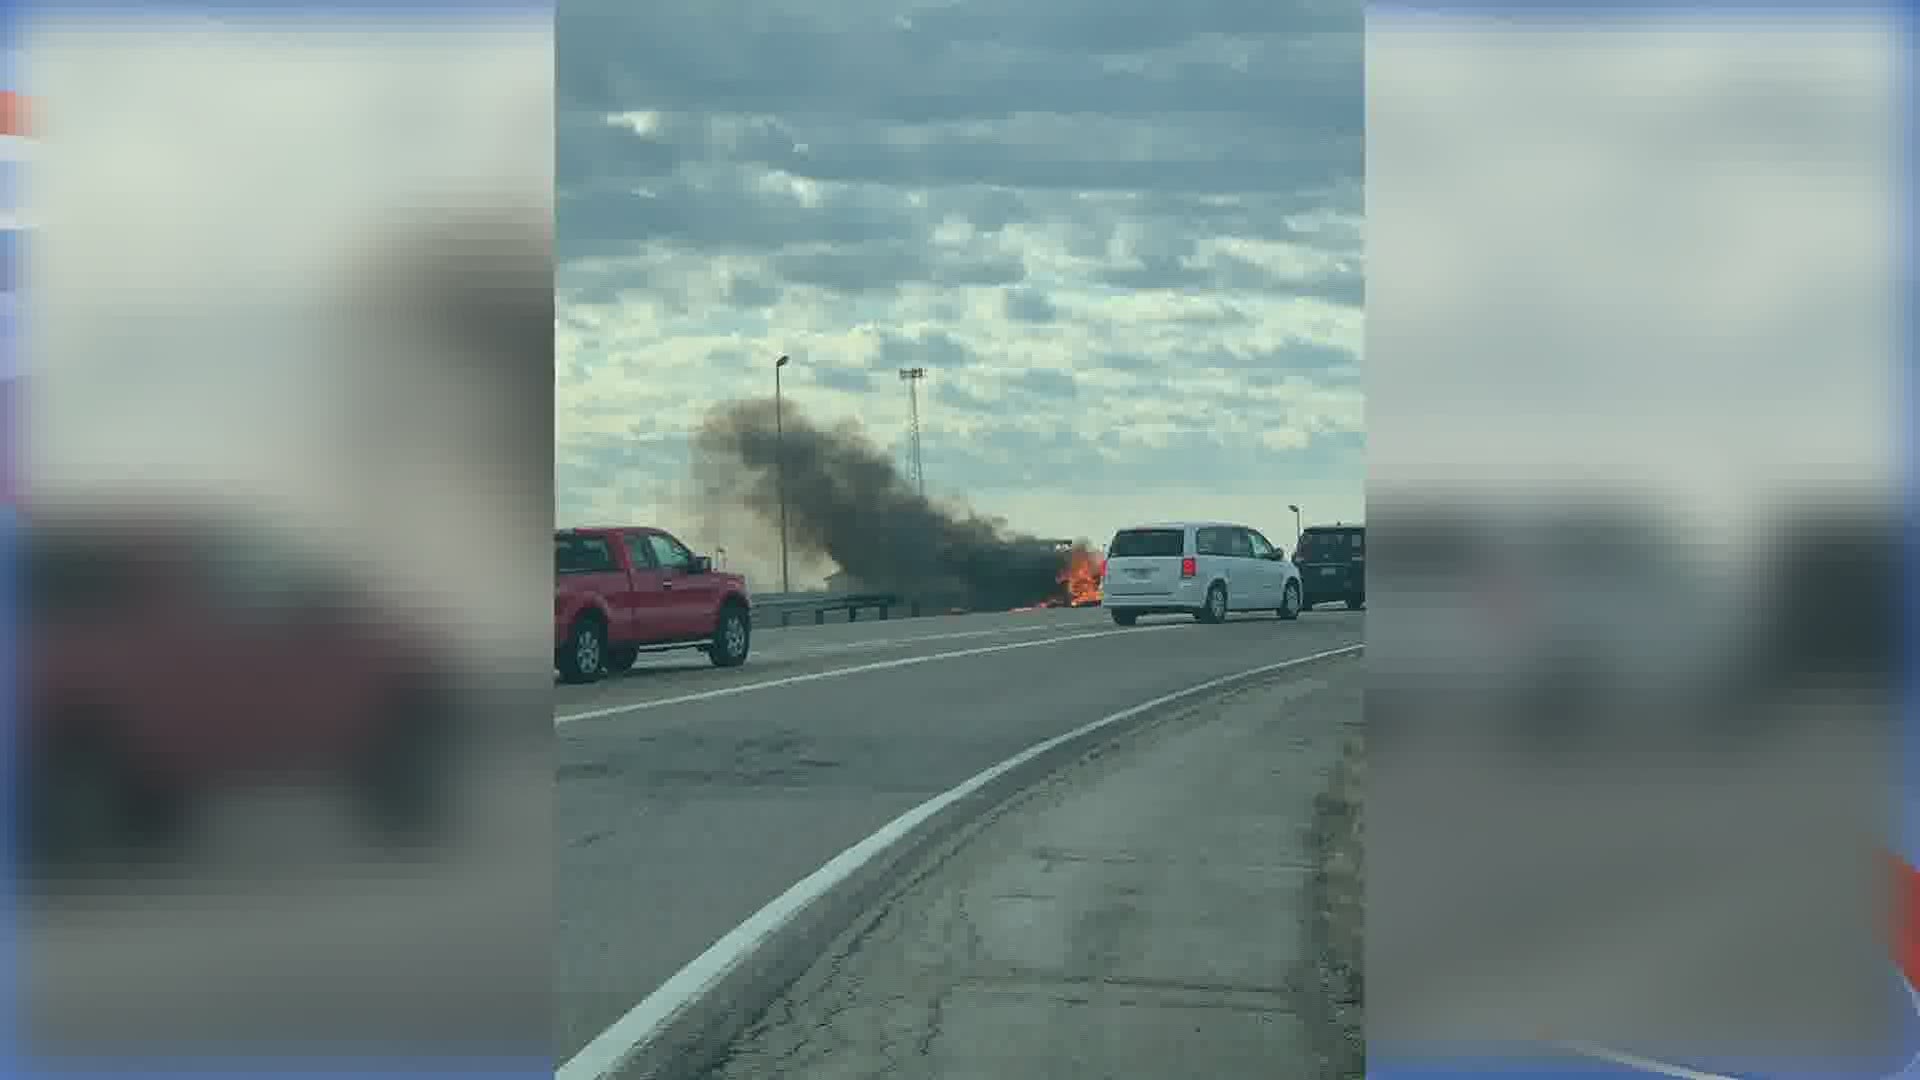 State police say three people died when a small plane crashed and burst into flames on Interstate 55 in central Illinois.